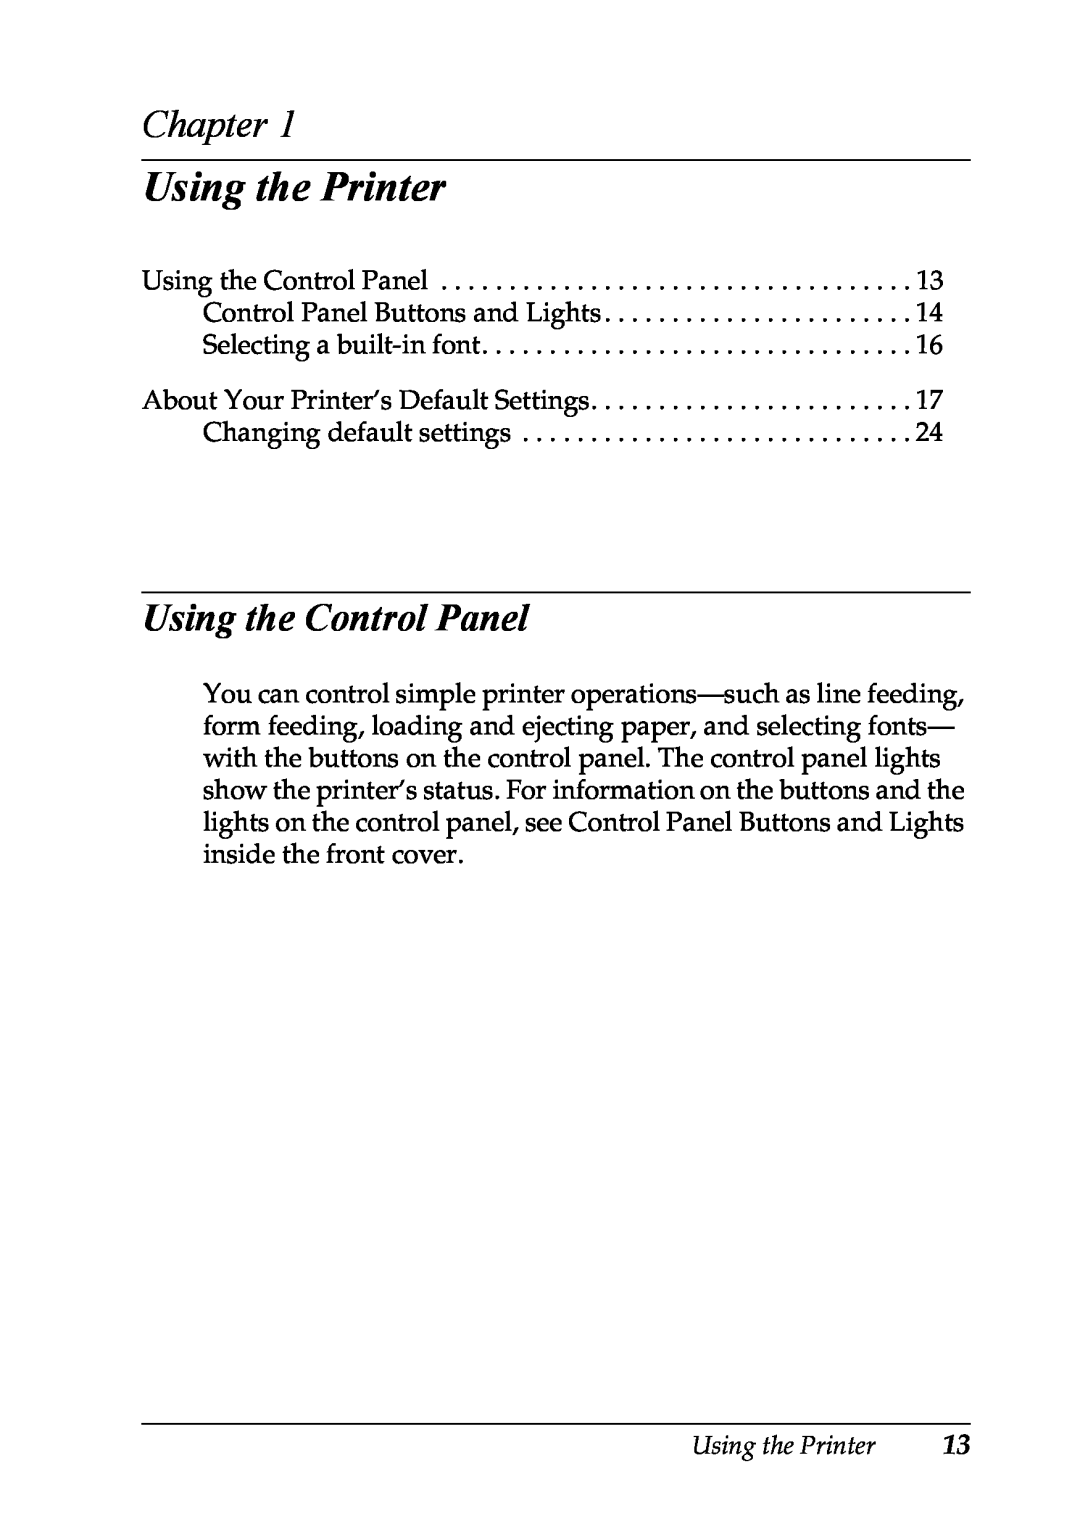 Epson LX-1170 manual Using the Printer, Chapter, Using the Control Panel 